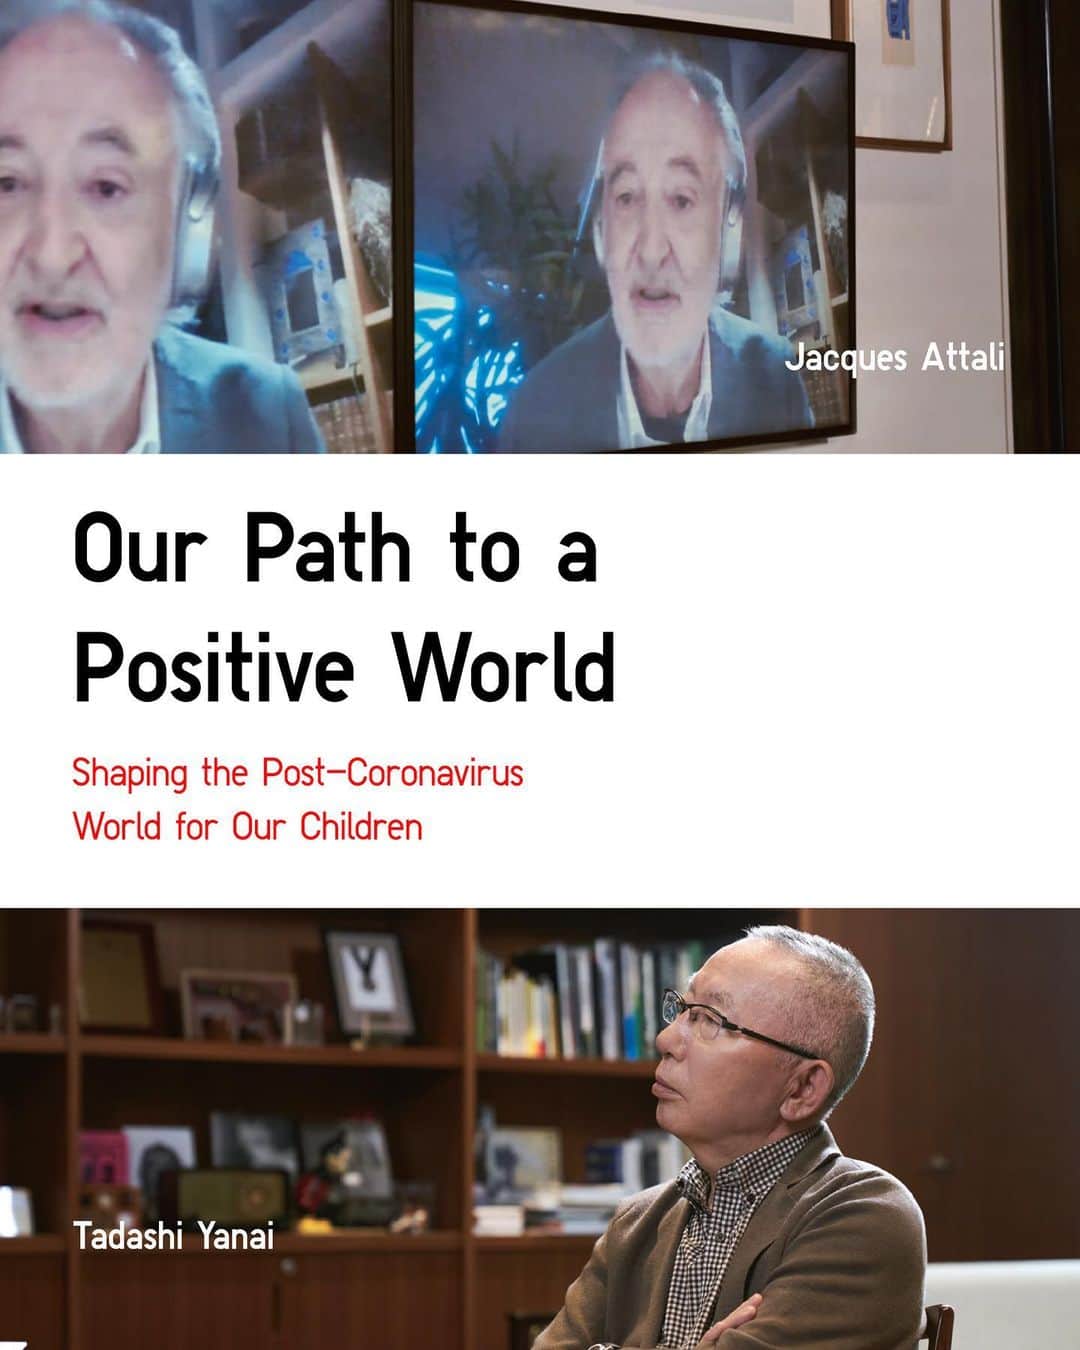 UNIQLO UKのインスタグラム：「In this first chapter of our 2021 sustainability report, we feature a conversation between economist Jacques Attali @jacques_attali & Fast Retailing Co., Ltd. chairman and president Tadashi Yanai about the state of our world, and the path toward a better future for all.   Jacques Attali, a world-renowned thinker who predicted and warned of a global pandemic, chose to share his thoughts on a sustainable future with UNIQLO.   #UNIQLOSustainability #UNIQLO #LifeWear」